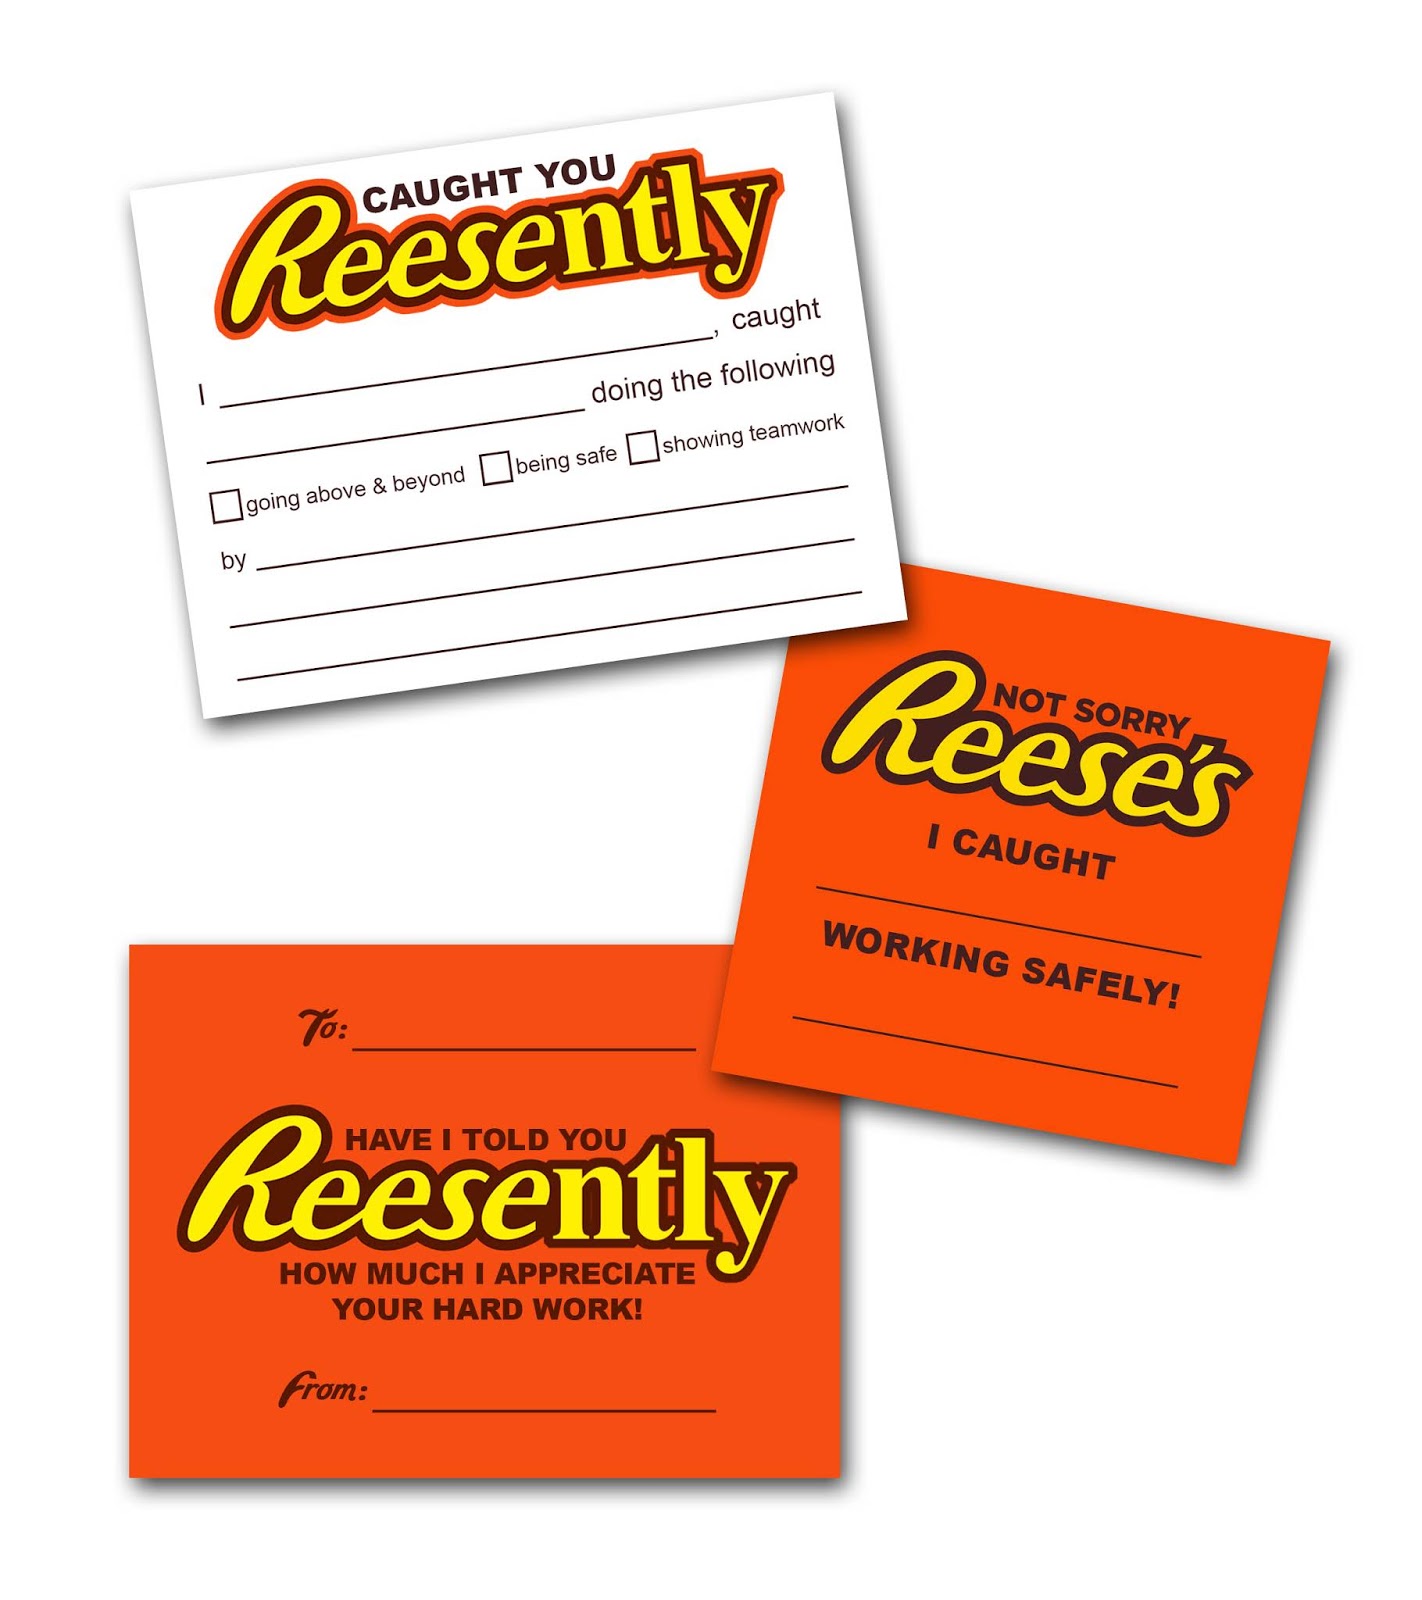 paper-perfection-reese-s-employee-appreciation-cards